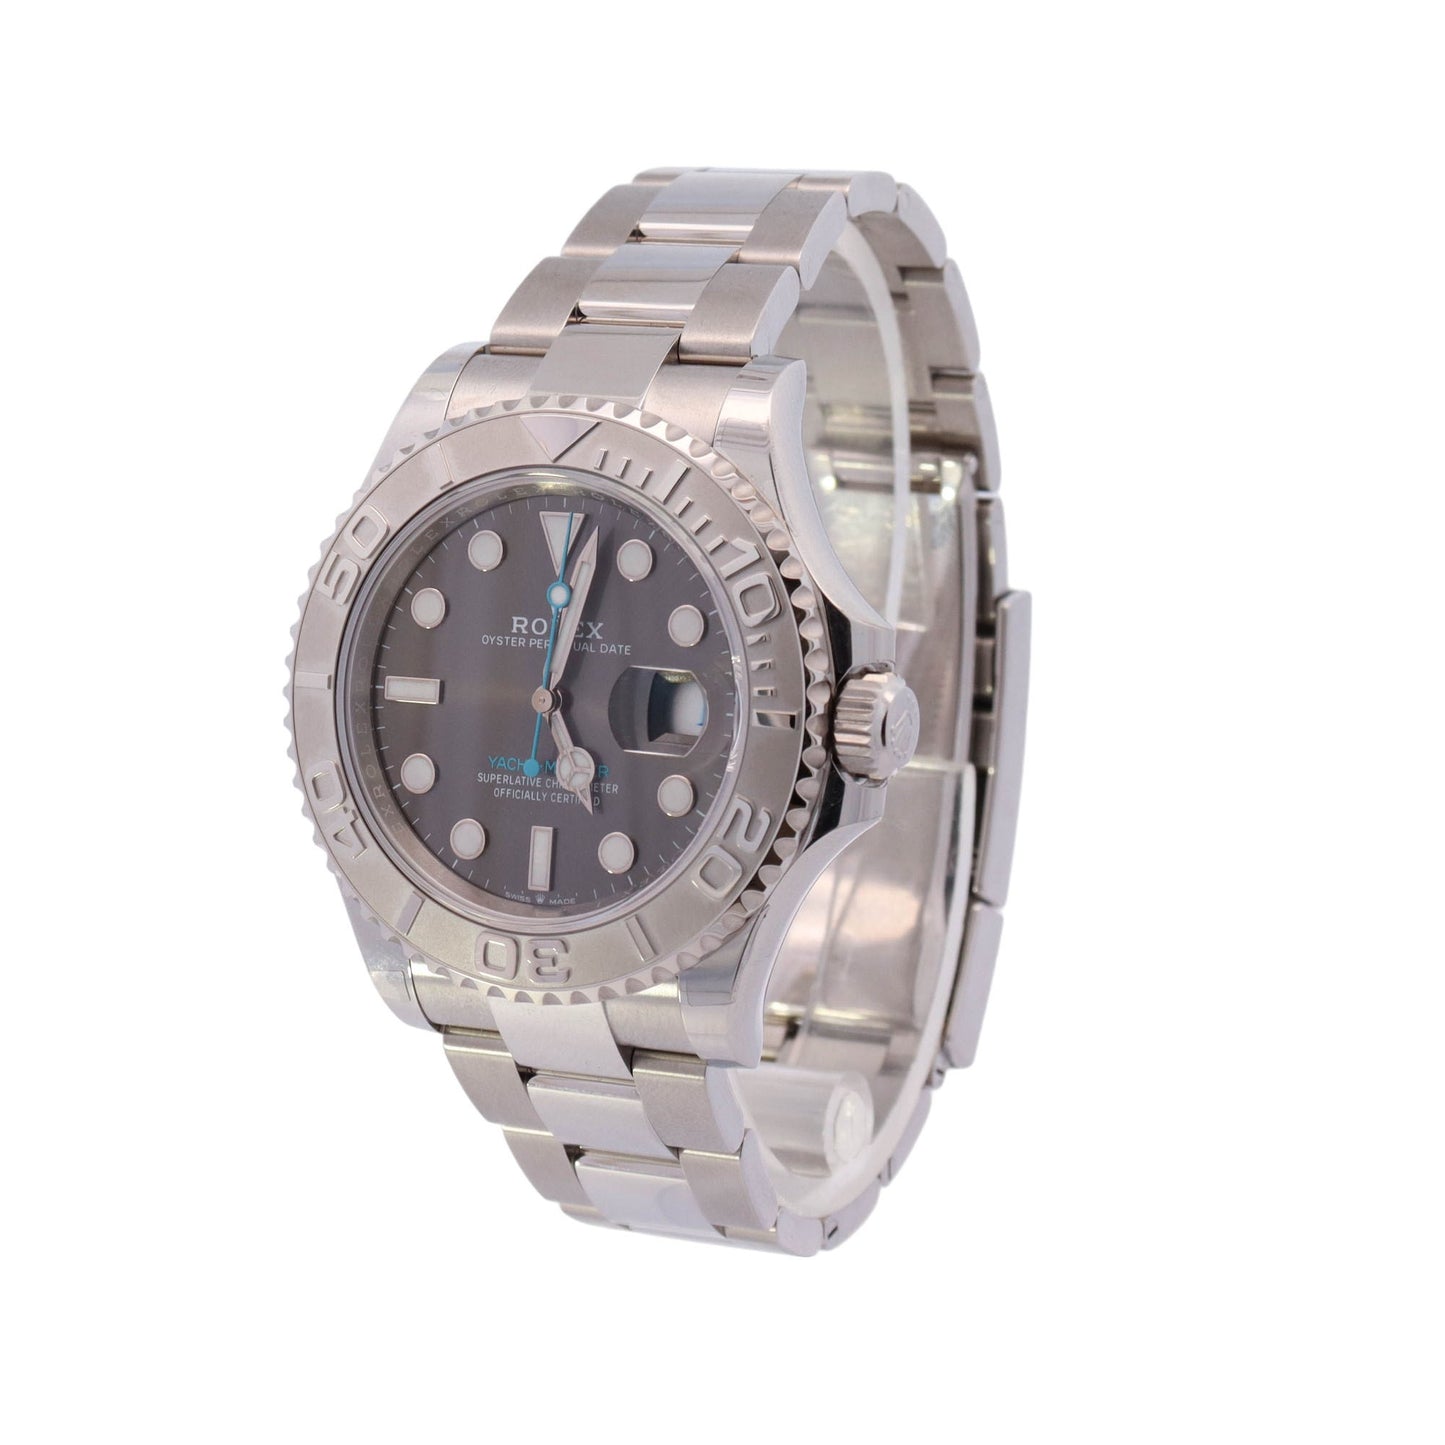 Rolex Yachtmaster Stainless Steel 40mm Rhodium Dot Dial Watch Reference #: 126622 - Happy Jewelers Fine Jewelry Lifetime Warranty